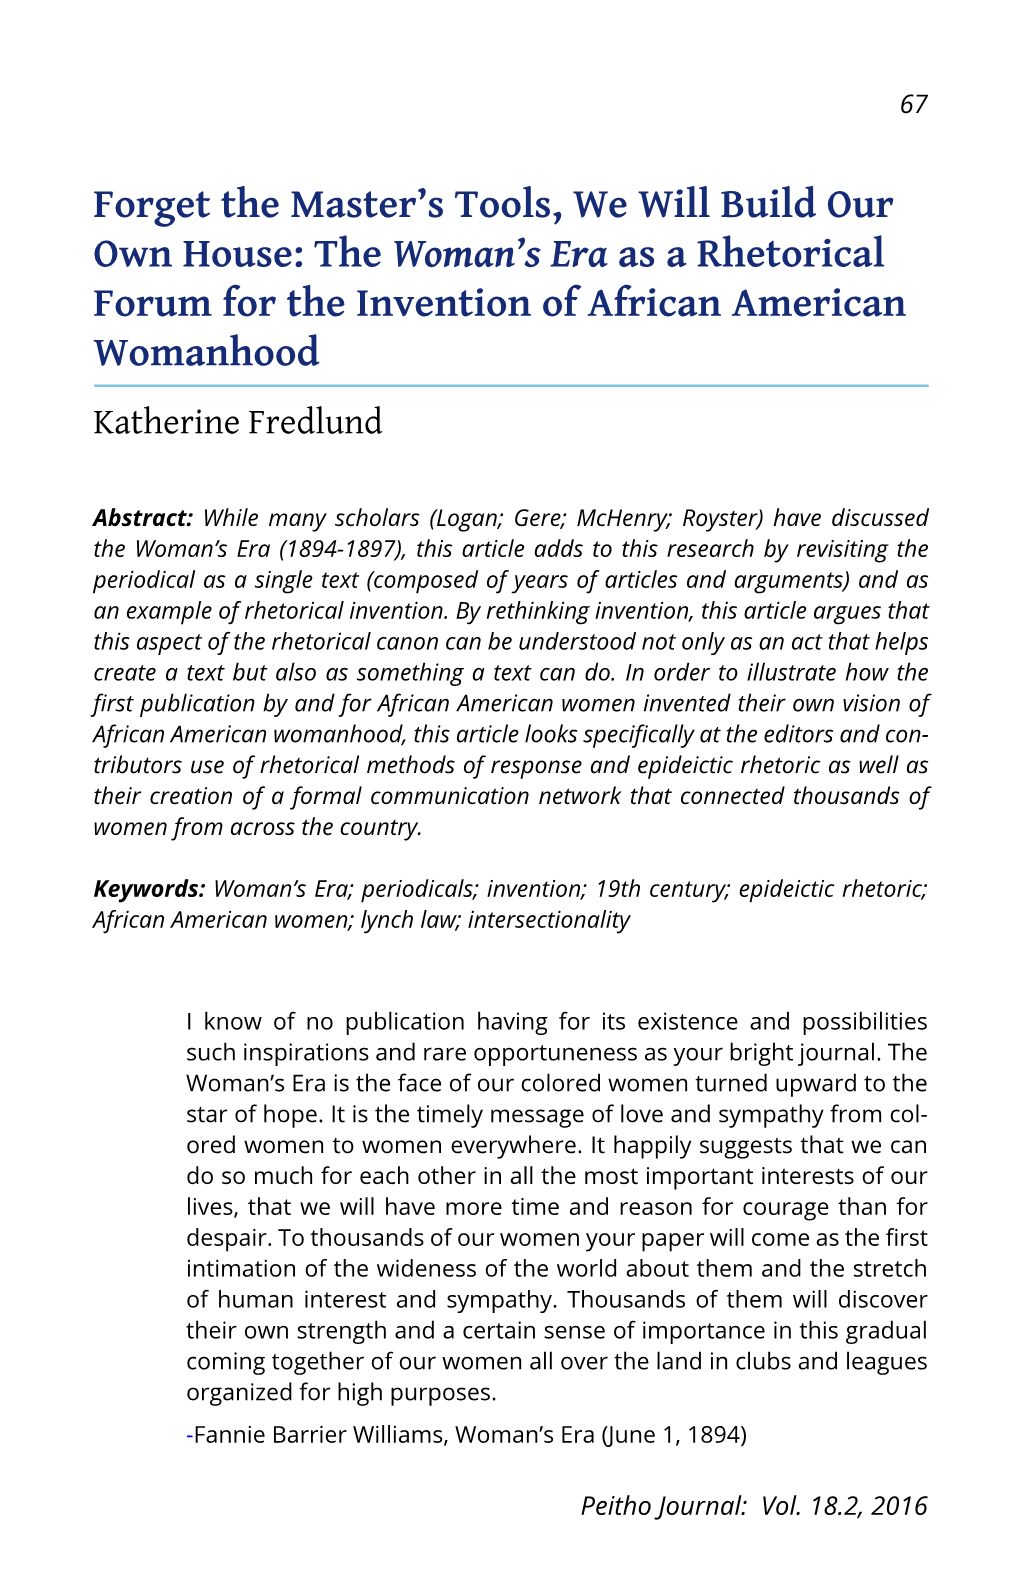 The Woman's Era As a Rhetorical Forum for the Invention of African A